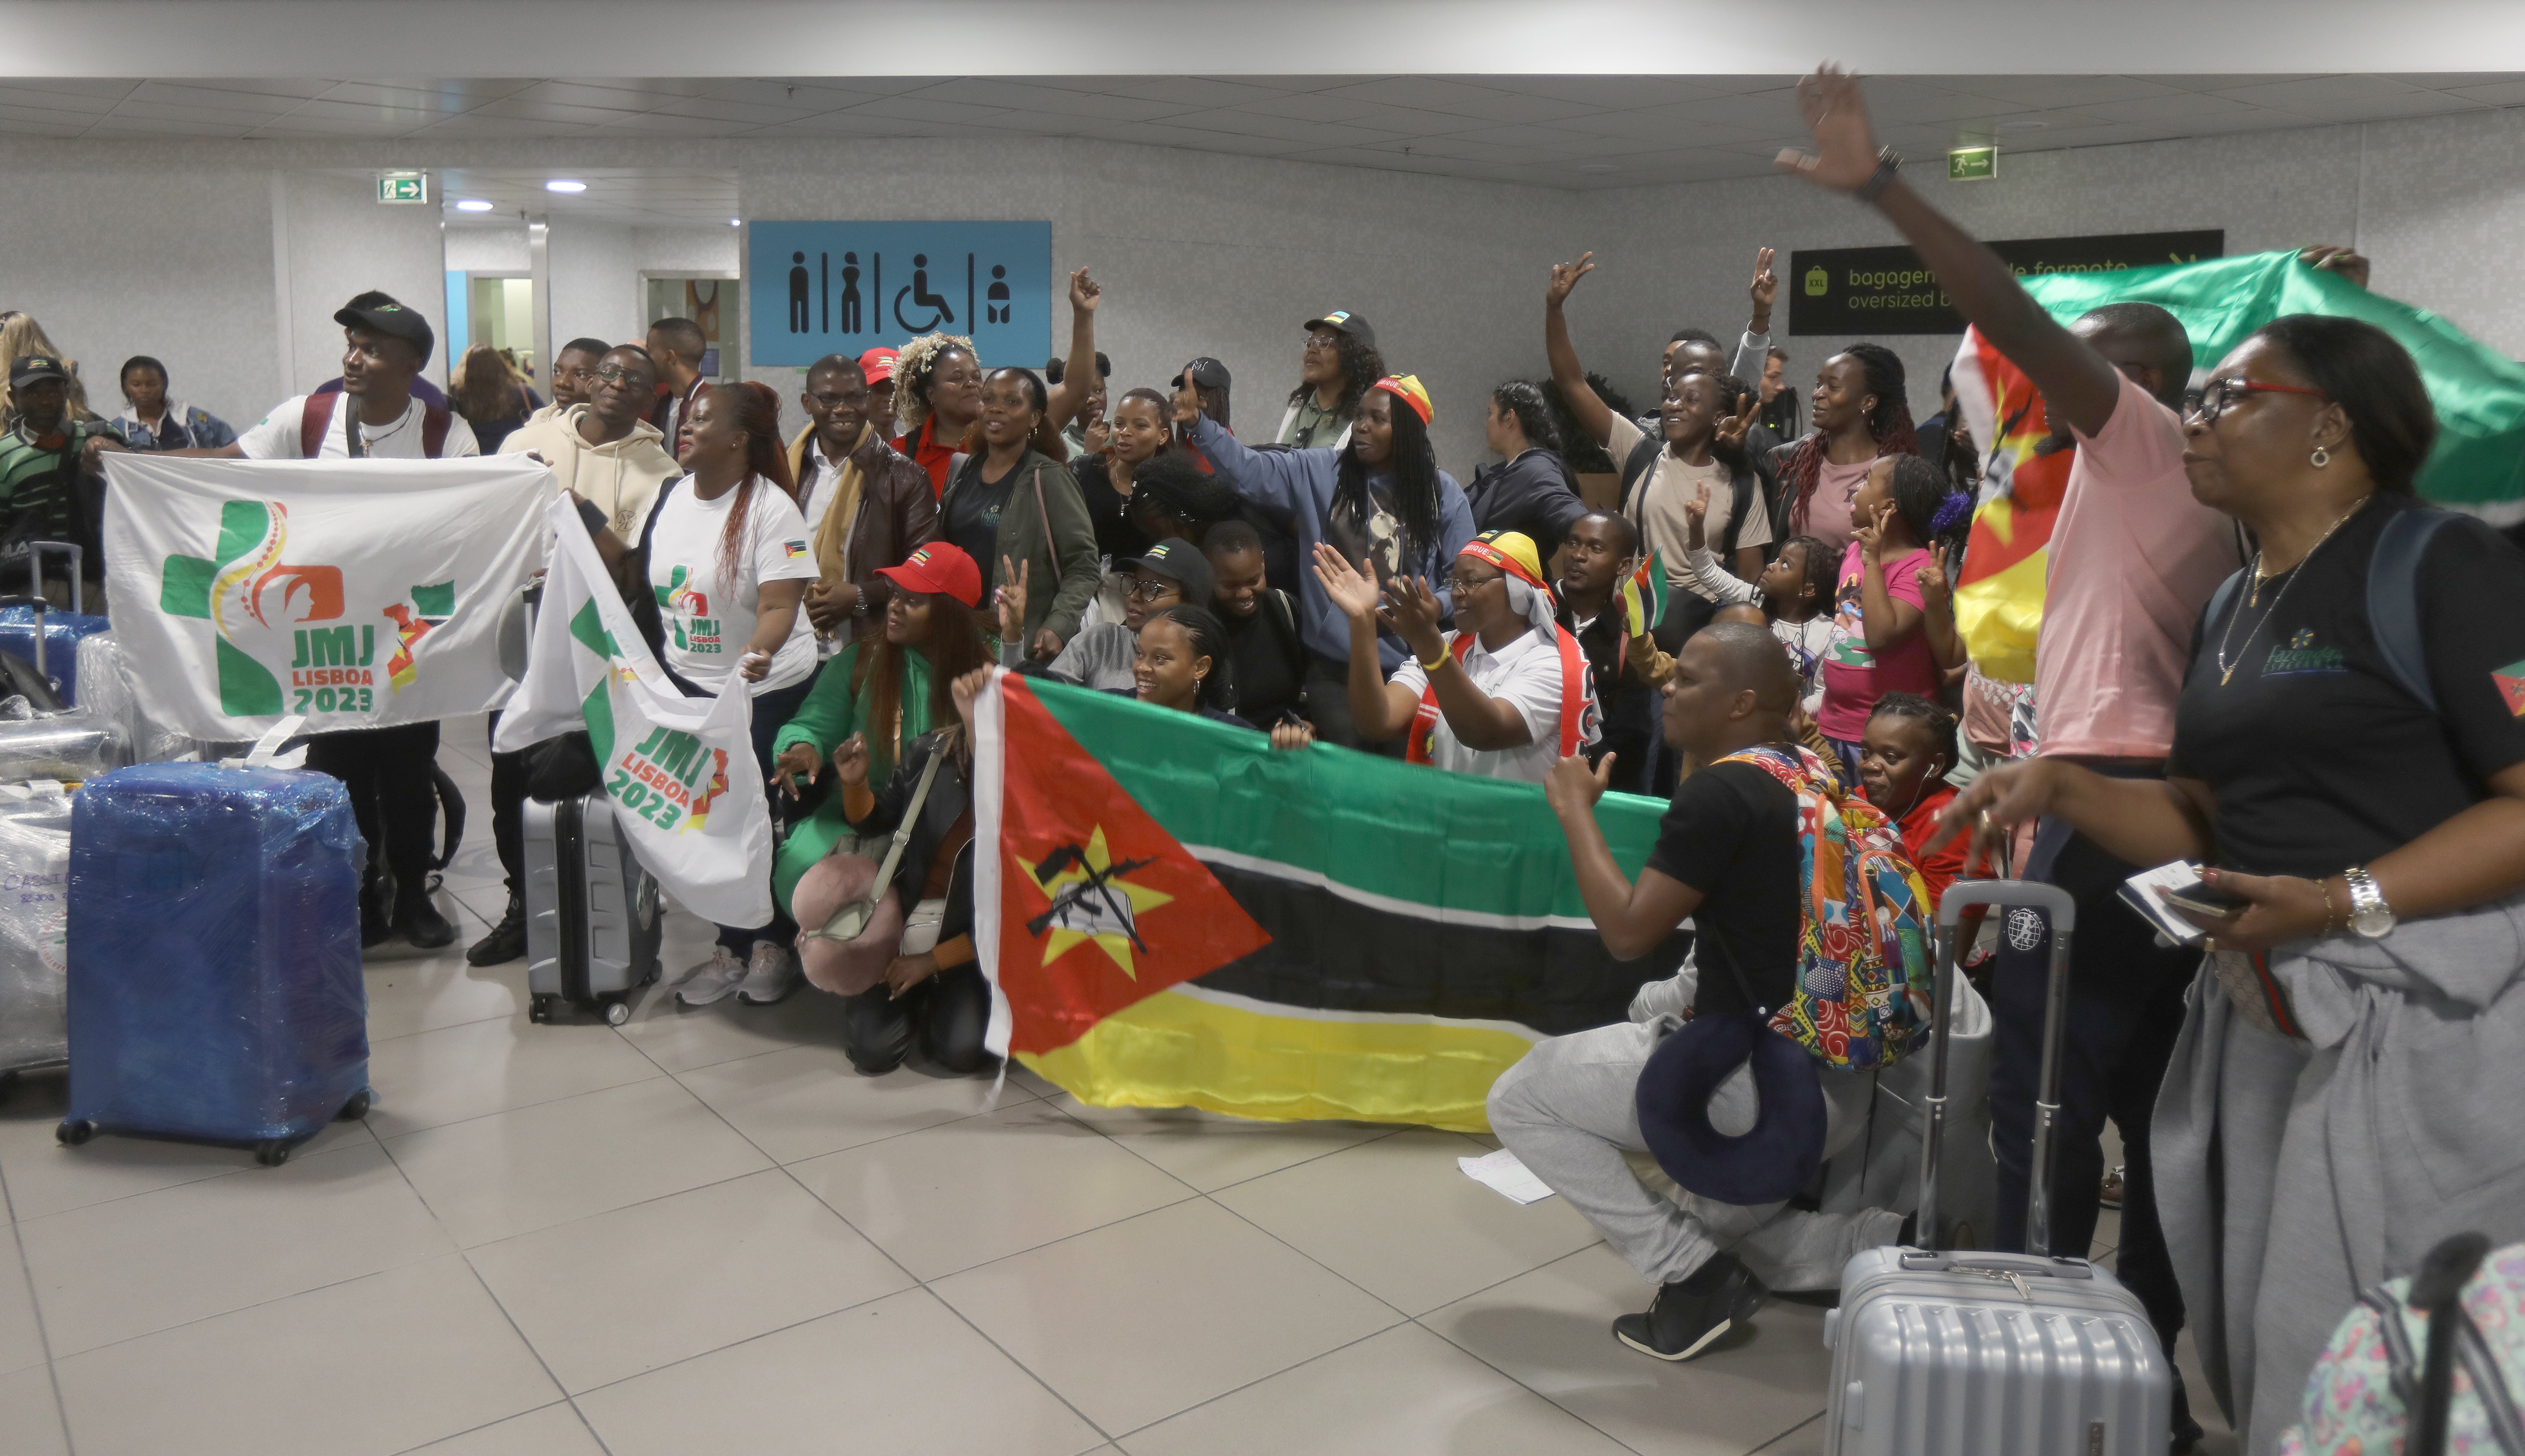 a group of pilgrims from Mozambique appear to be cheering for a picture in an airport hallway